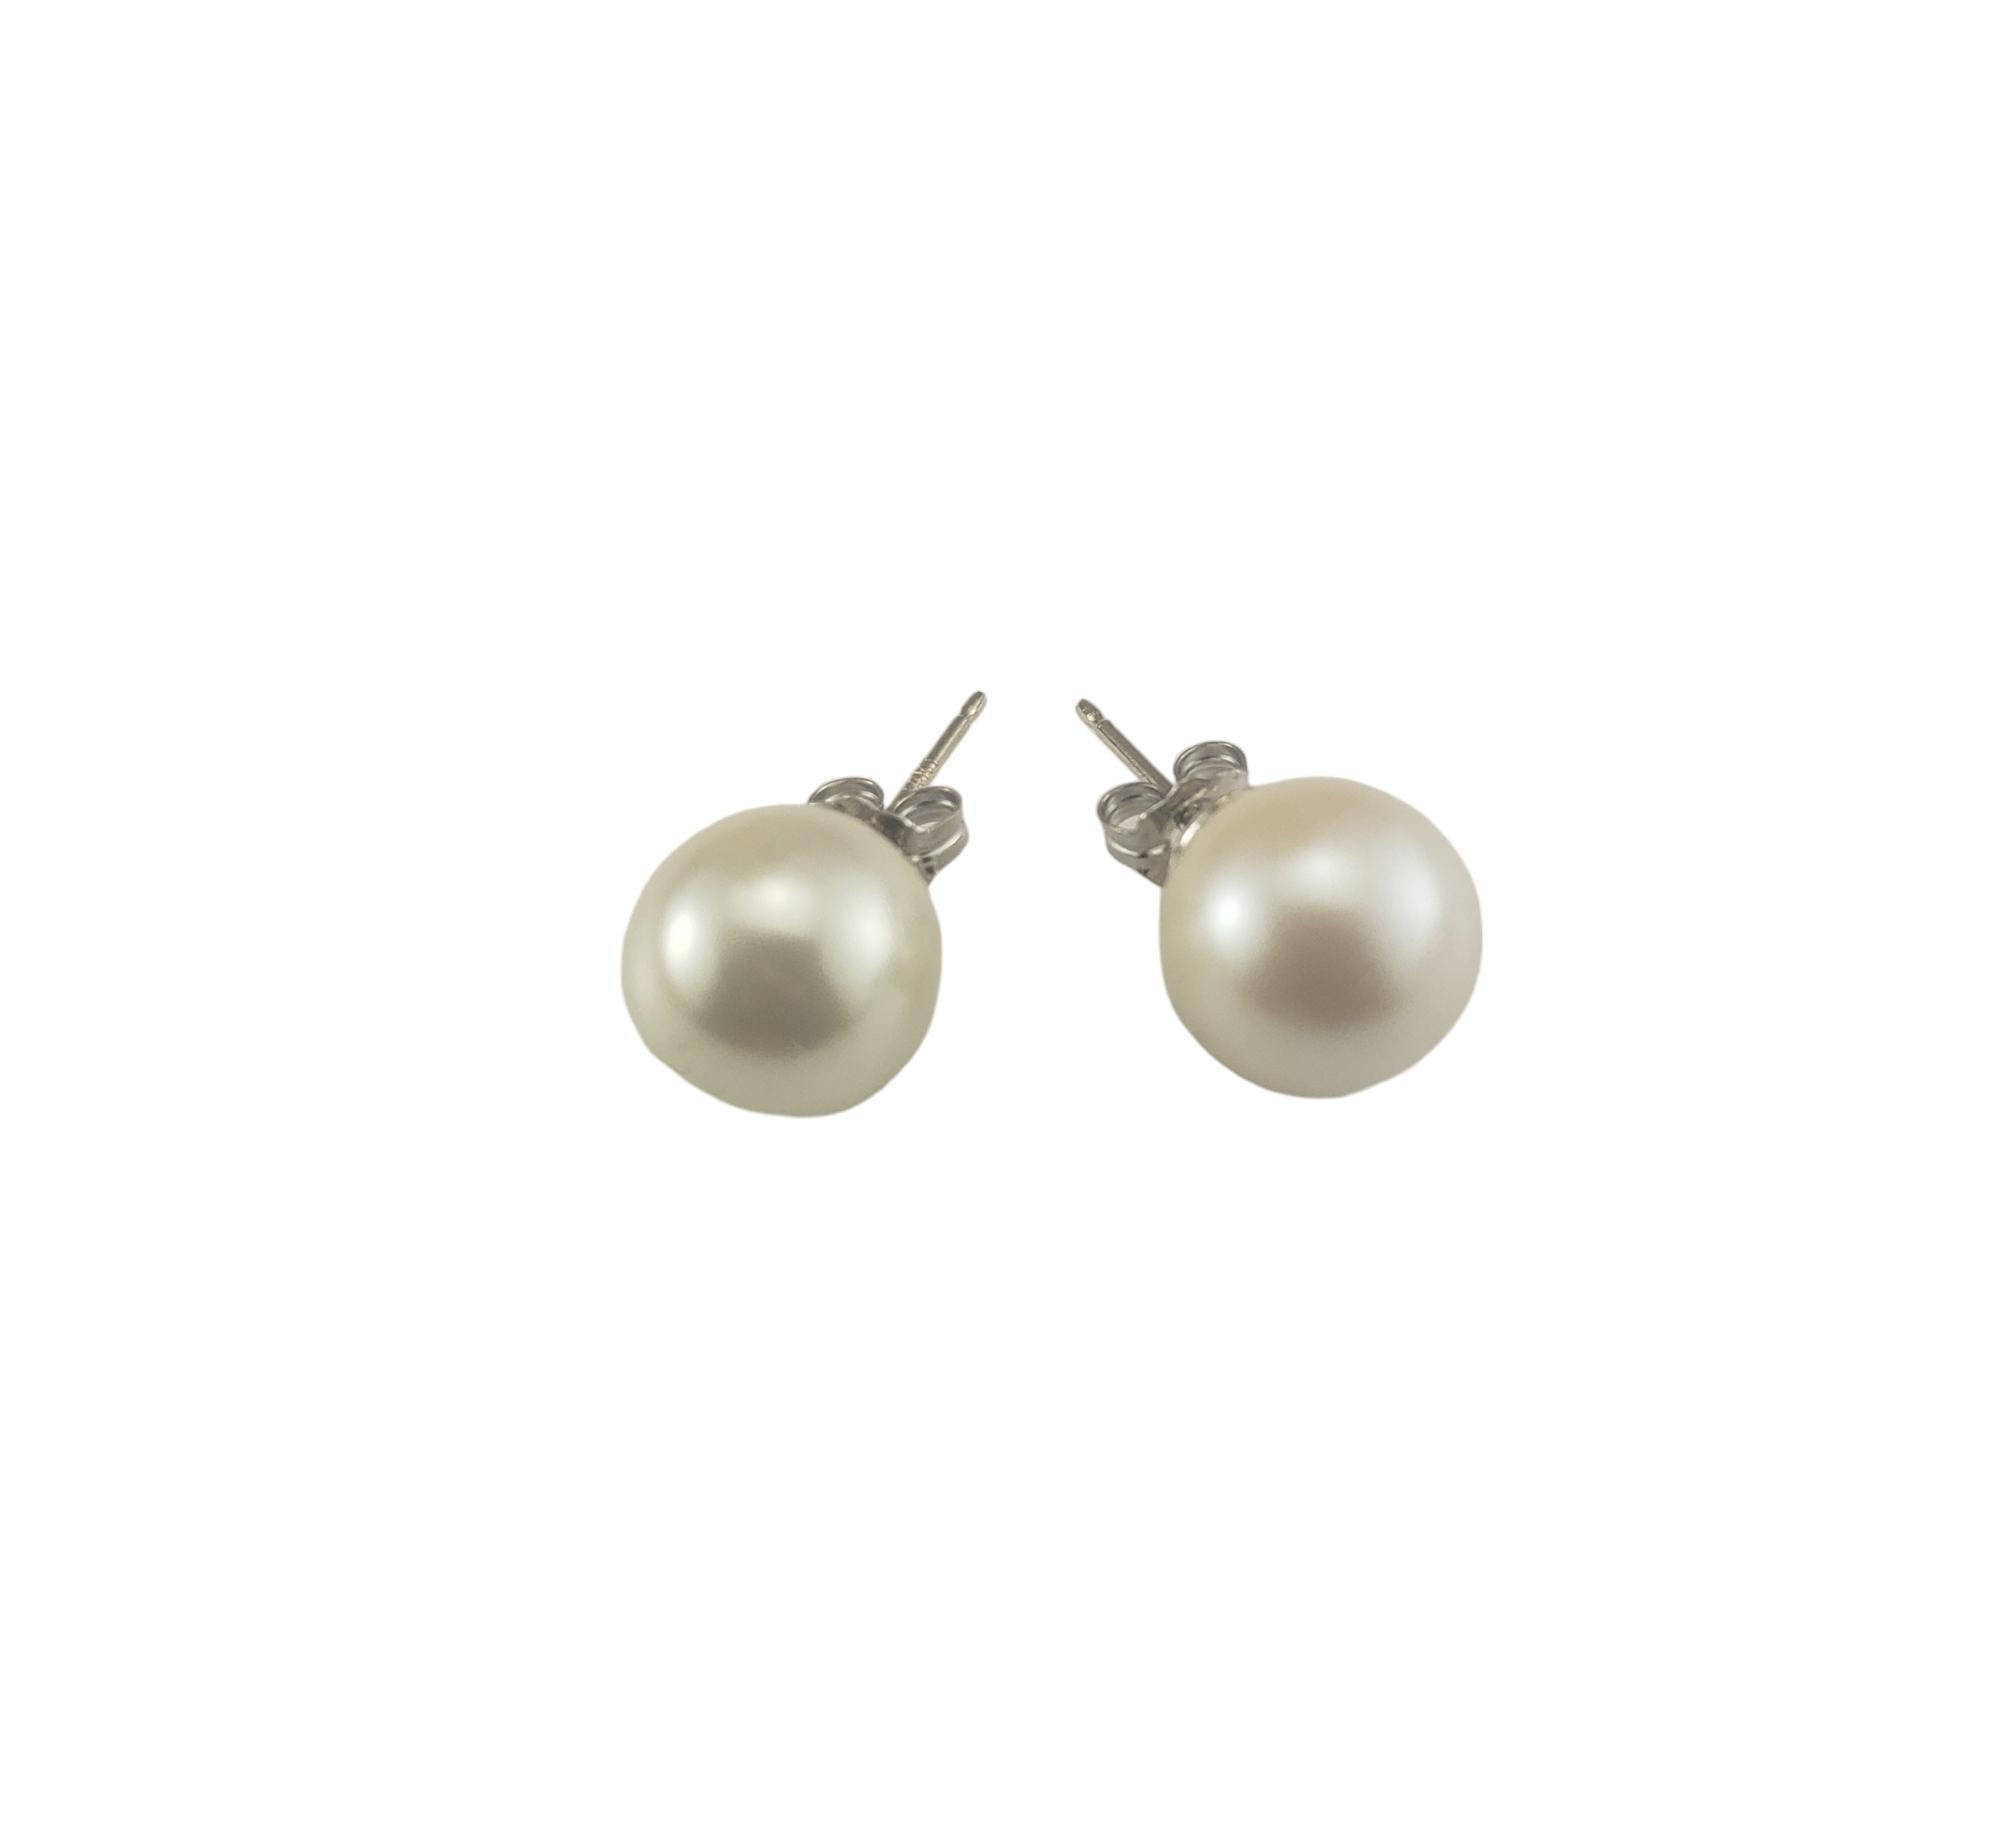 14 Karat White Gold Pearl Stud Earrings-

These elegant earrings each feature one white pearl (10 mm) set in classic 14K white gold.  Push back closures.

Size: 10 mm

Stamped: 14KT

Weight: 1.5 dwt./ 2.4 gr.

Very good condition, professionally